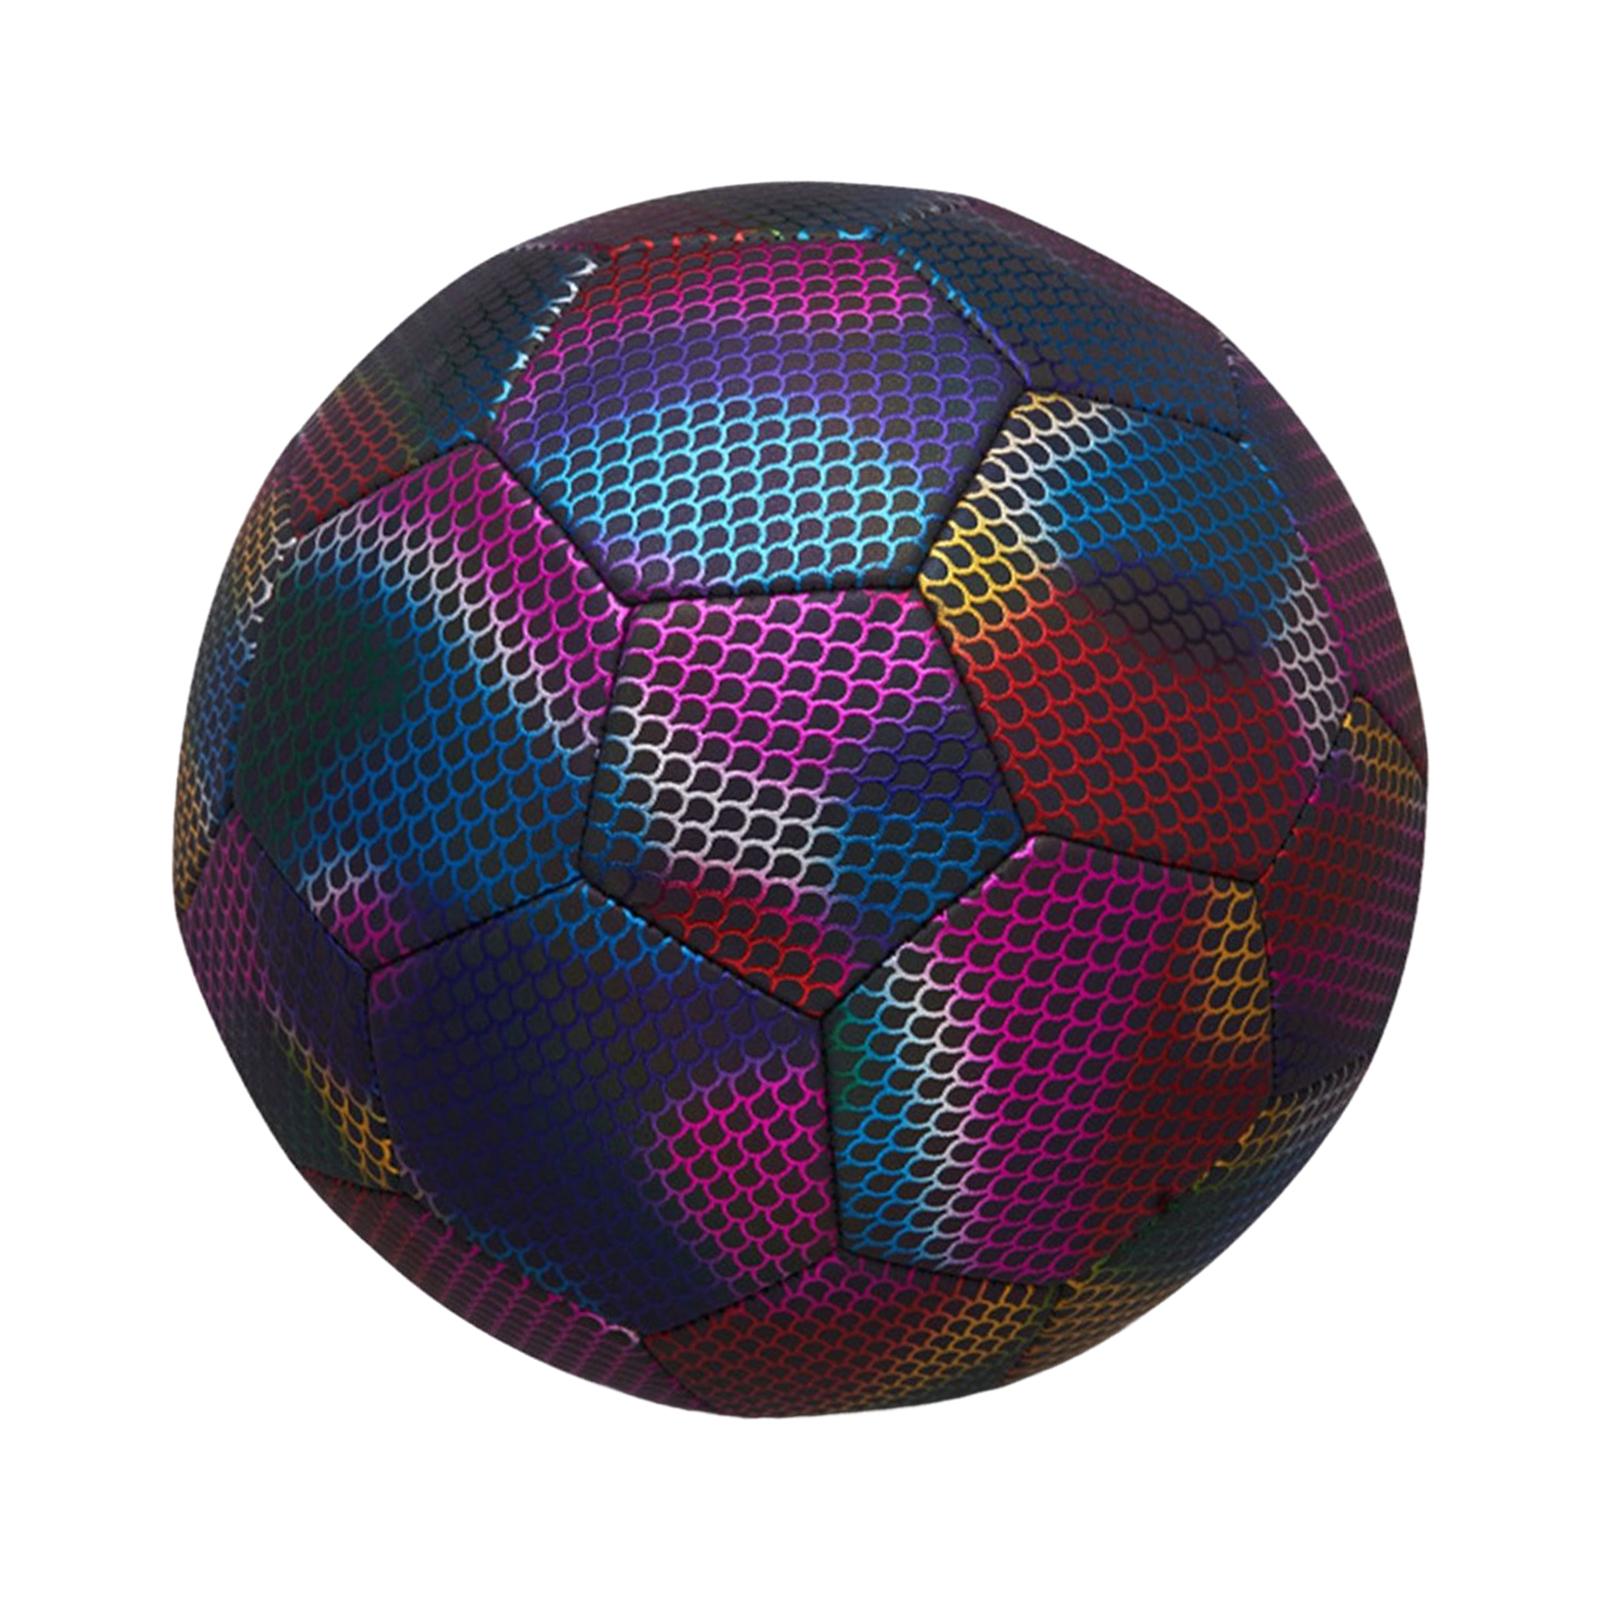 Glowing Reflective Soccer Ball Durable PU for Competition Training Child Water Droplet Size 5